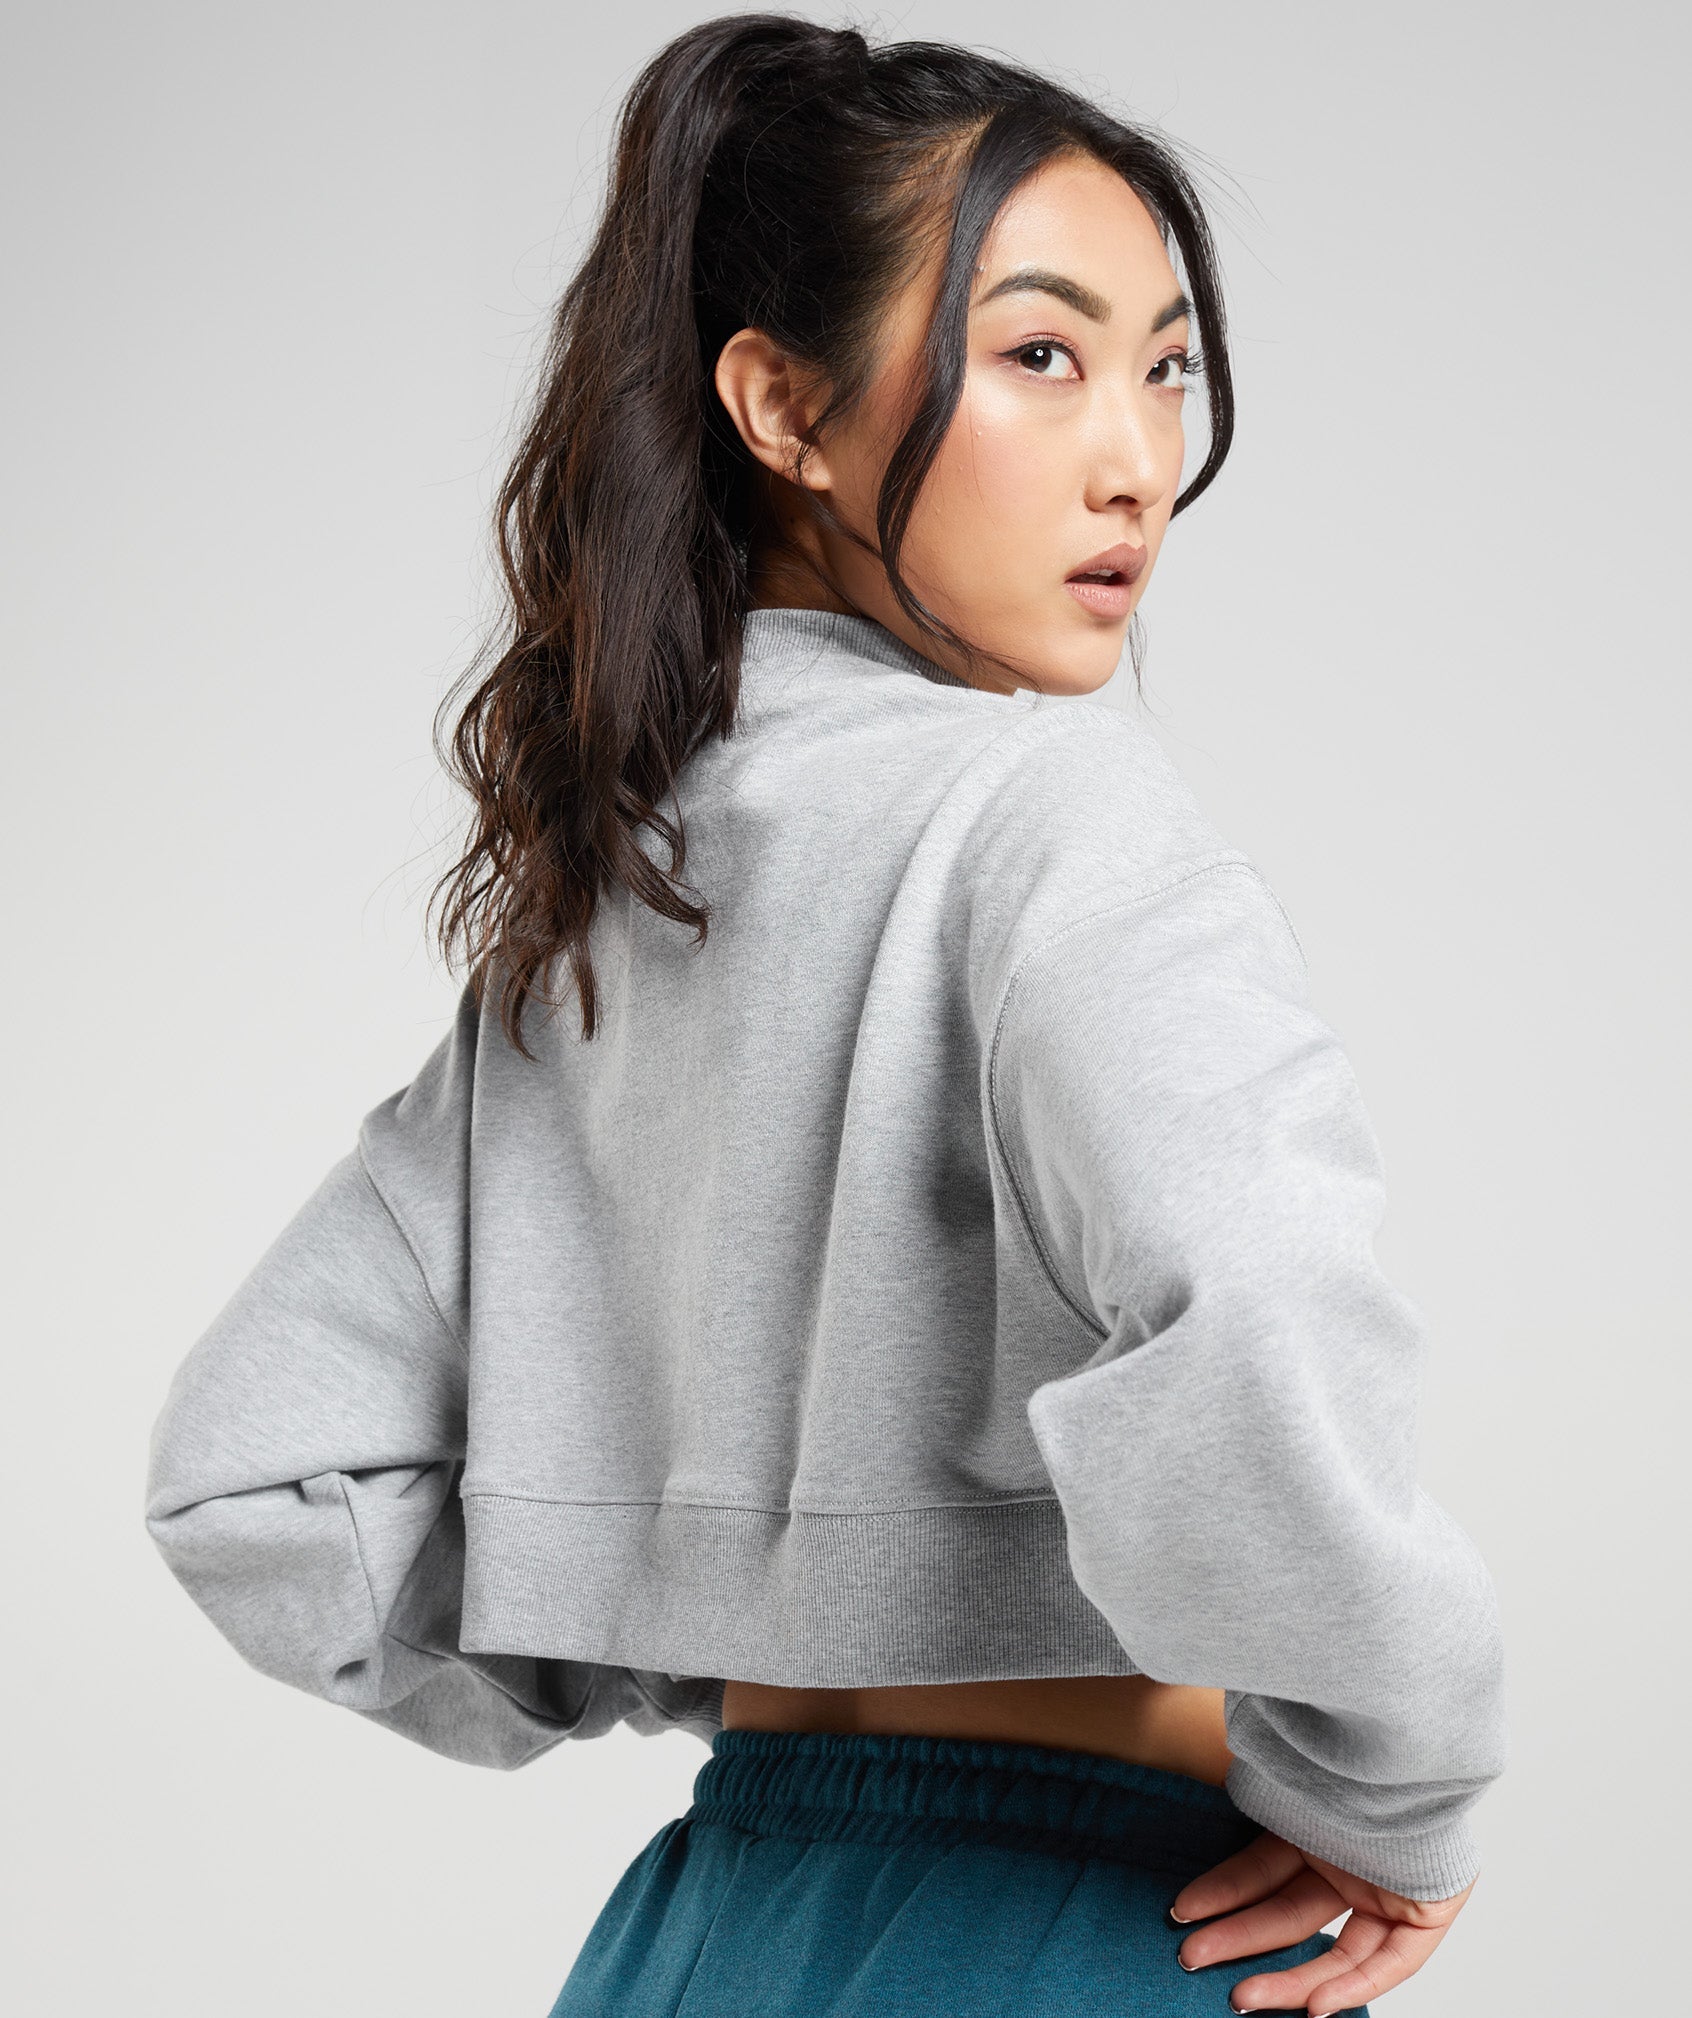 Rest Day Sweats Cropped Pullover in Light Grey Core Marl - view 6